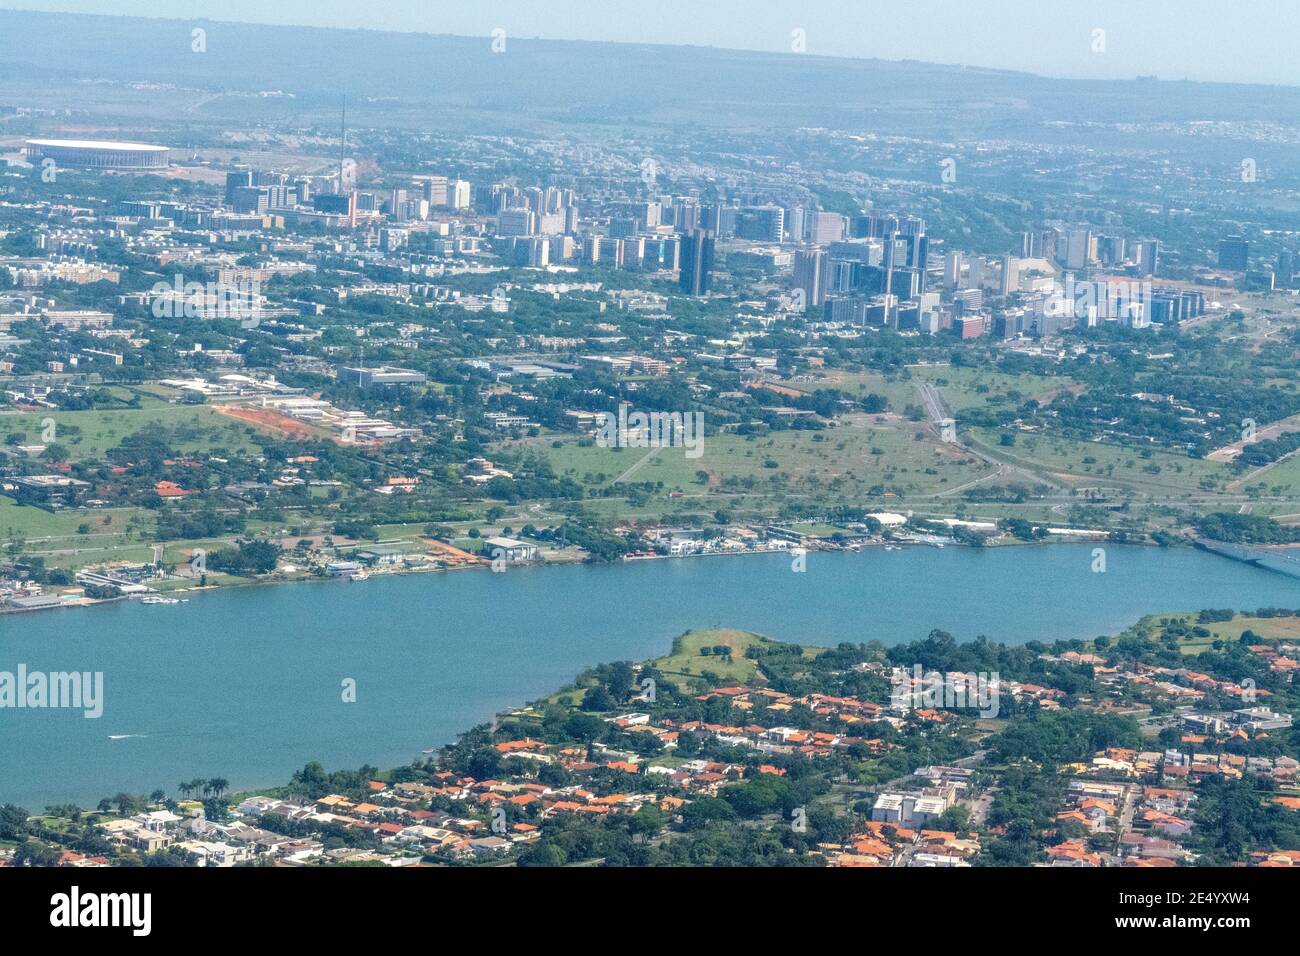 The man-made artificial ‘Lake Paranoa’ in the Federal district (An area of Government ministries and Parliament) in the capital city of Brasilia in Br Stock Photo